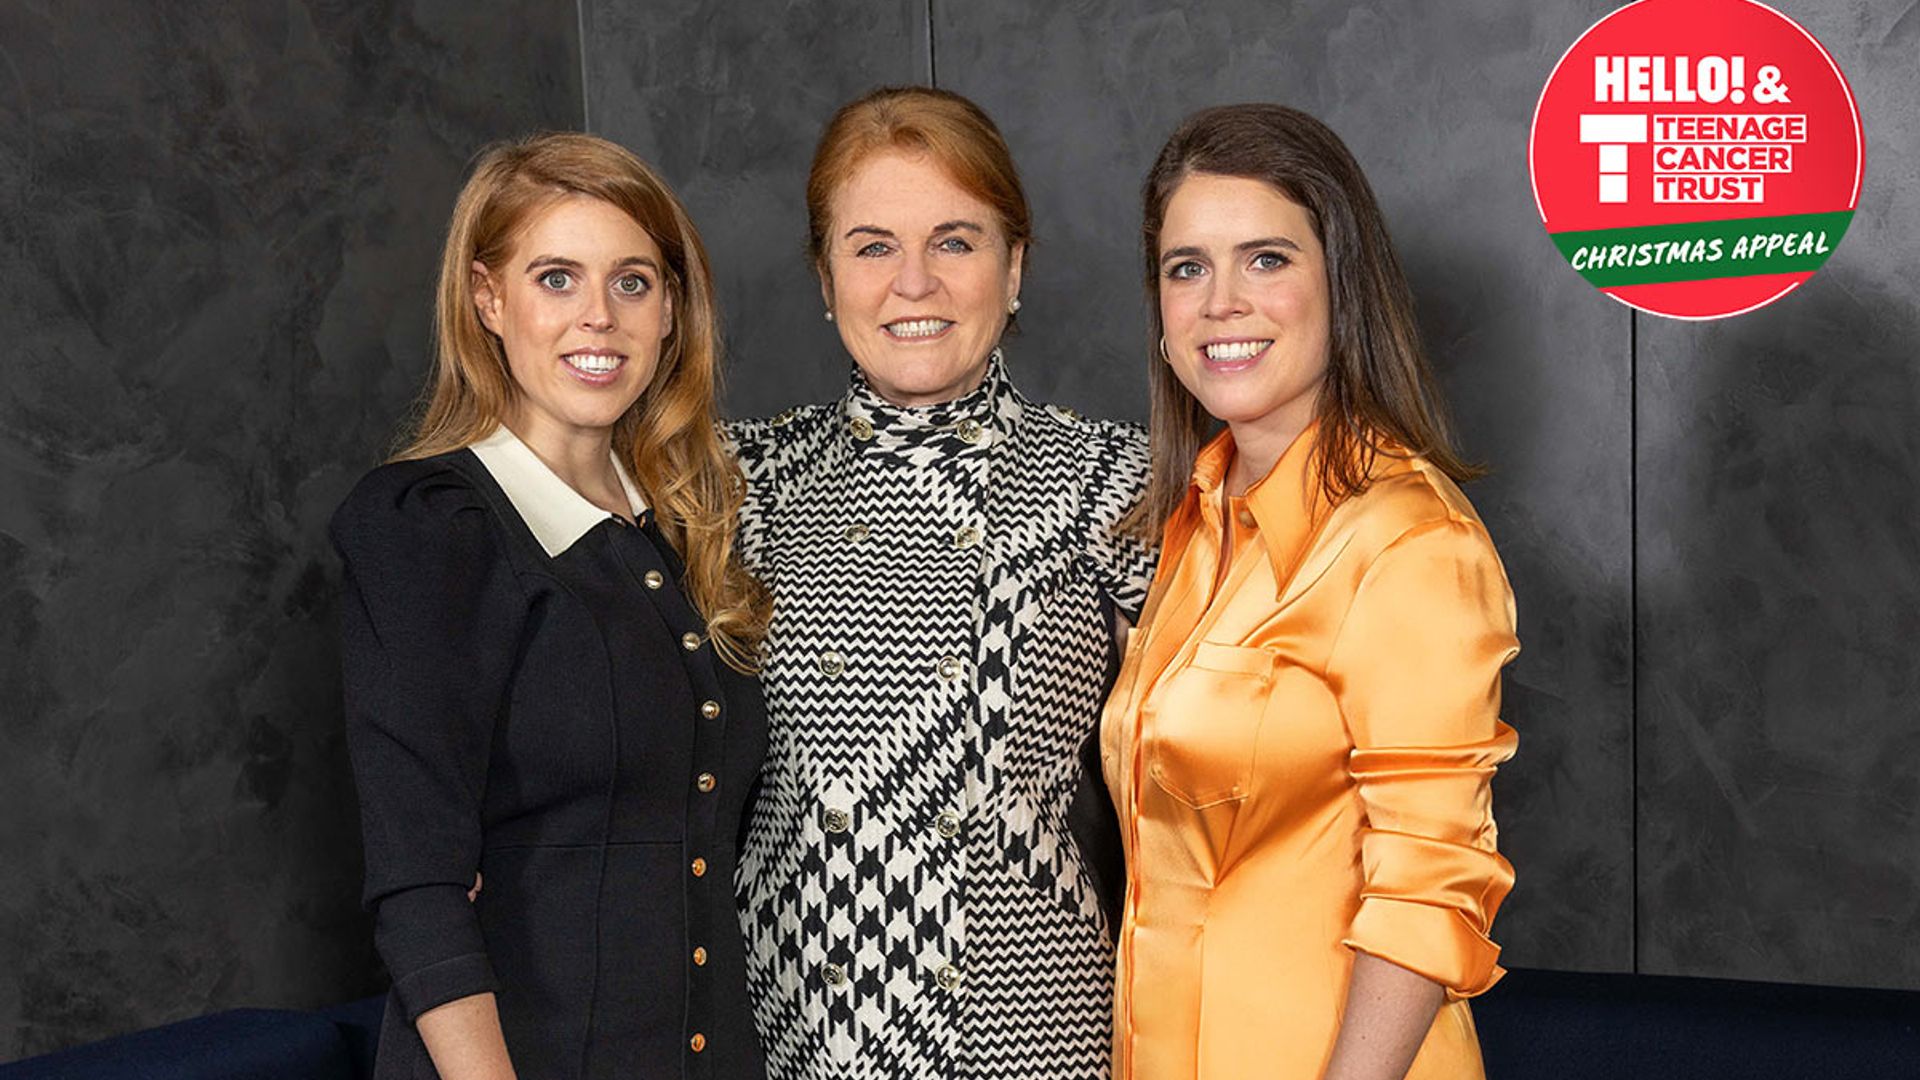 Sarah Ferguson teams up with HELLO! for a final plea to help young people with cancer